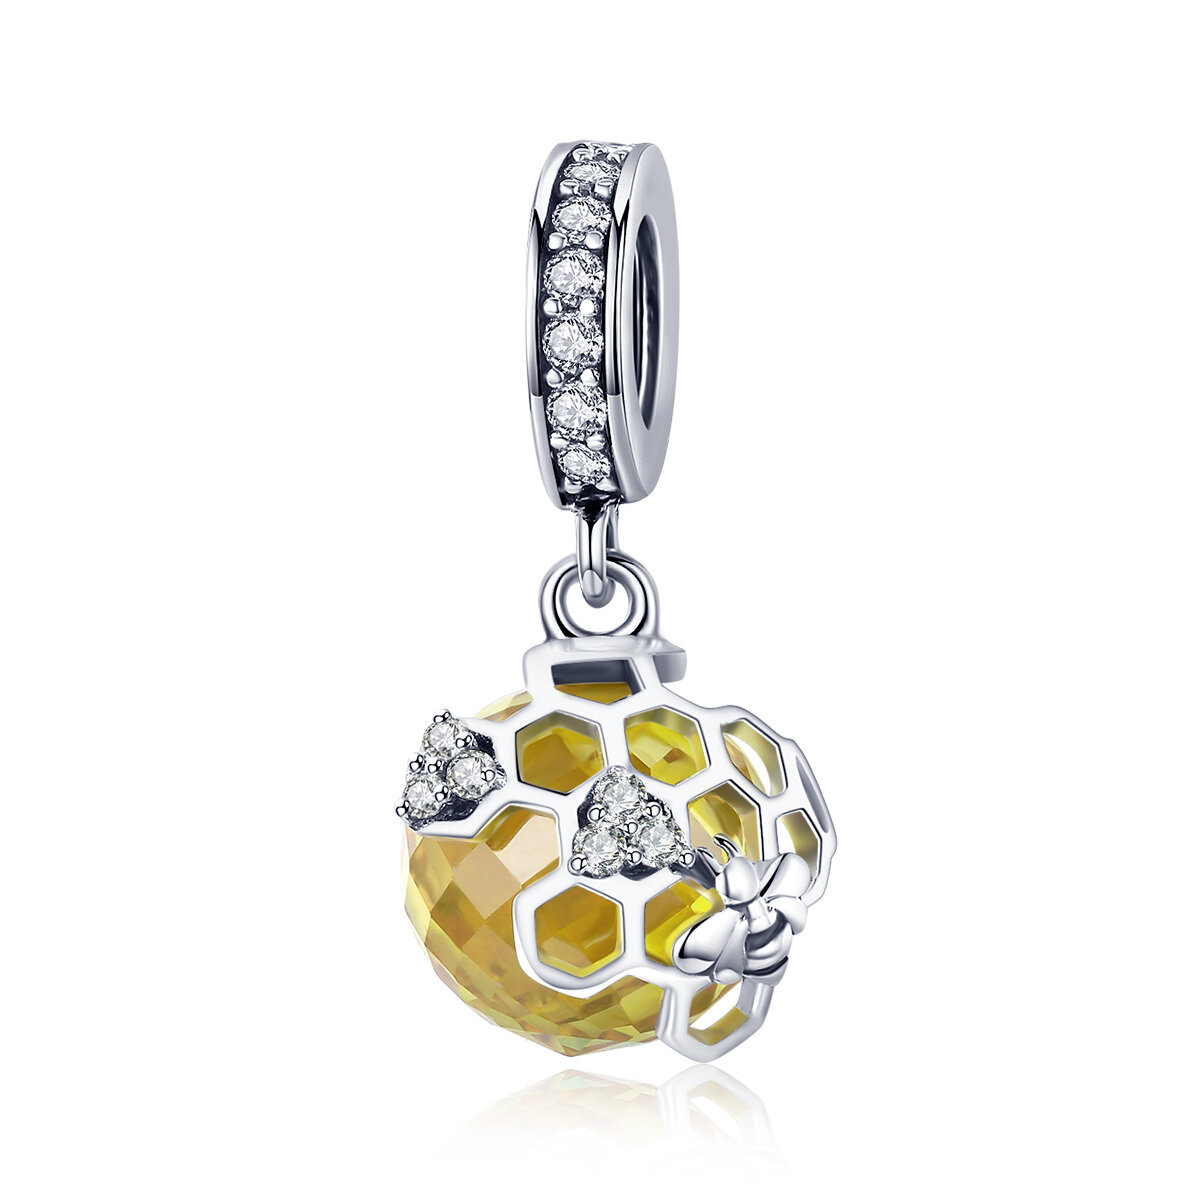 GemKing SCC879 the Honeycomb  S925 Sterling Silver Charm